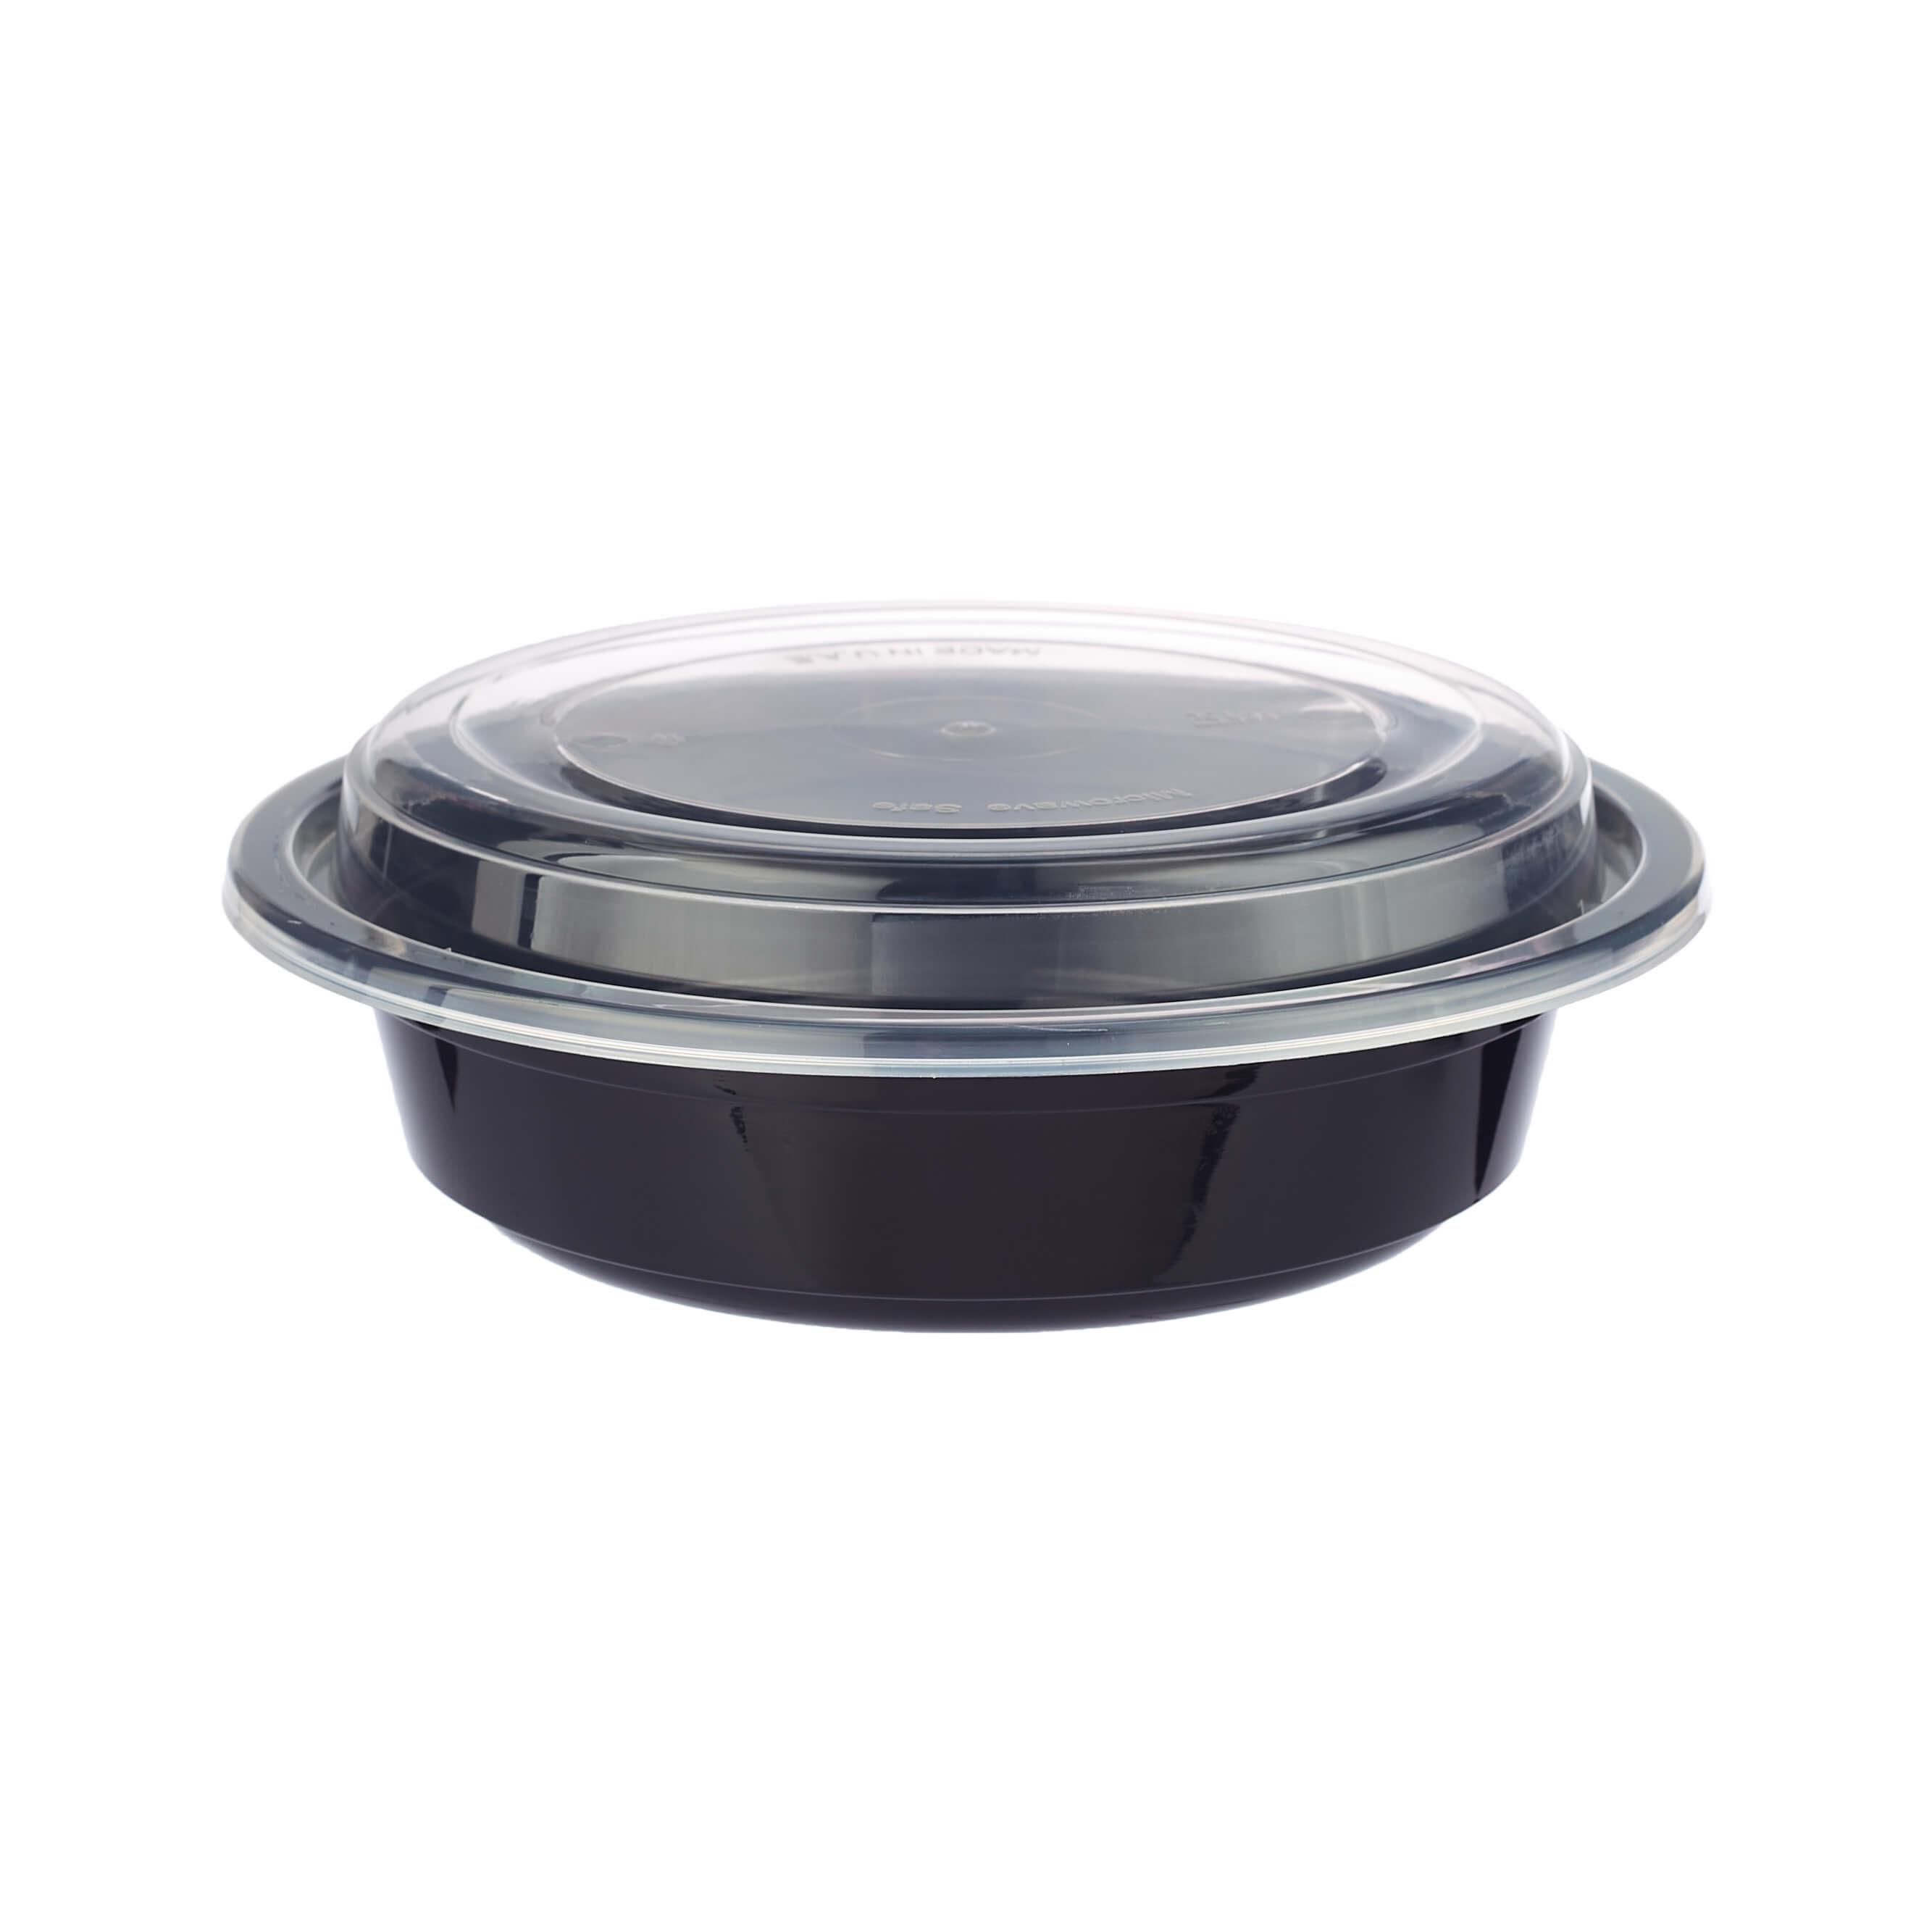 16 oz Black Base Round Container and Lid - Hotpack Global